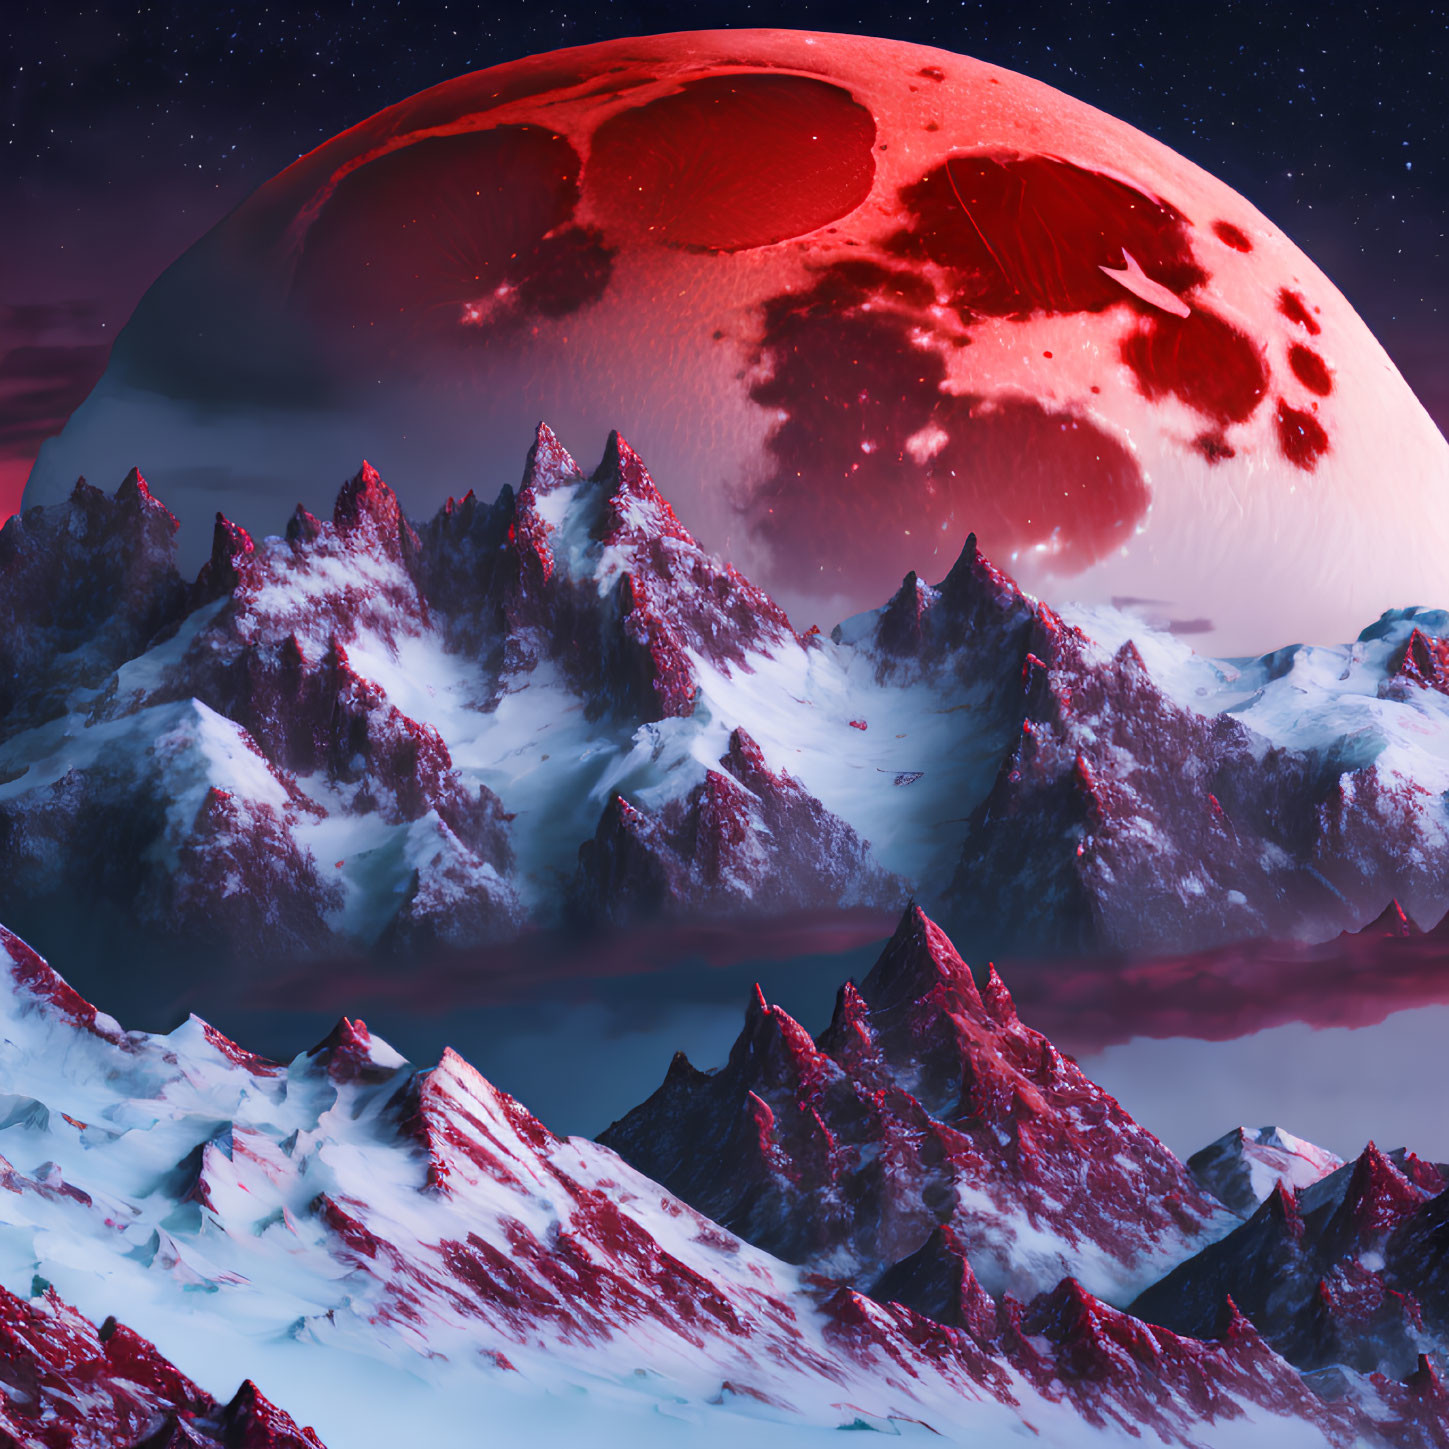 Surreal snowy mountains under red moon in night sky